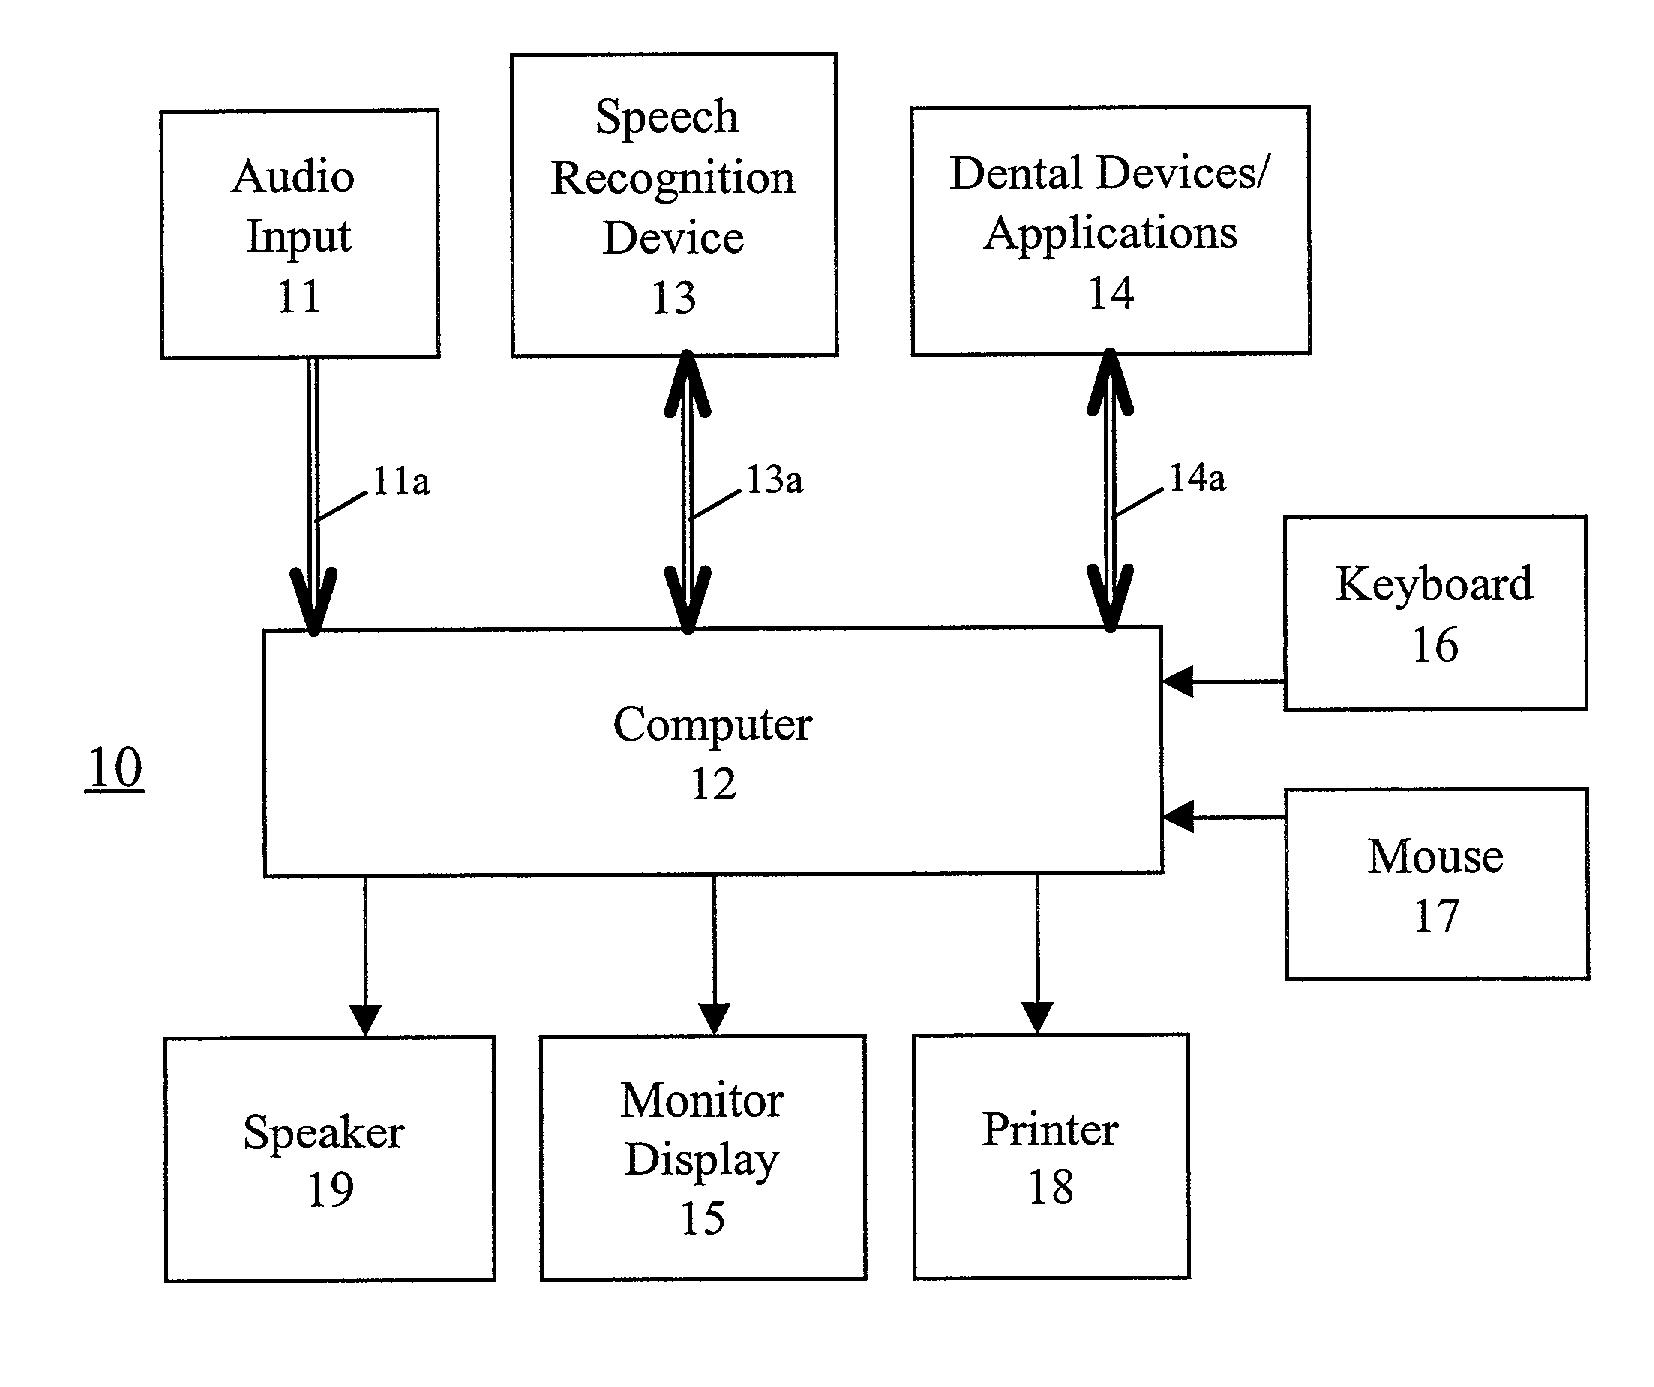 Command and control using speech recognition for dental computer connected devices